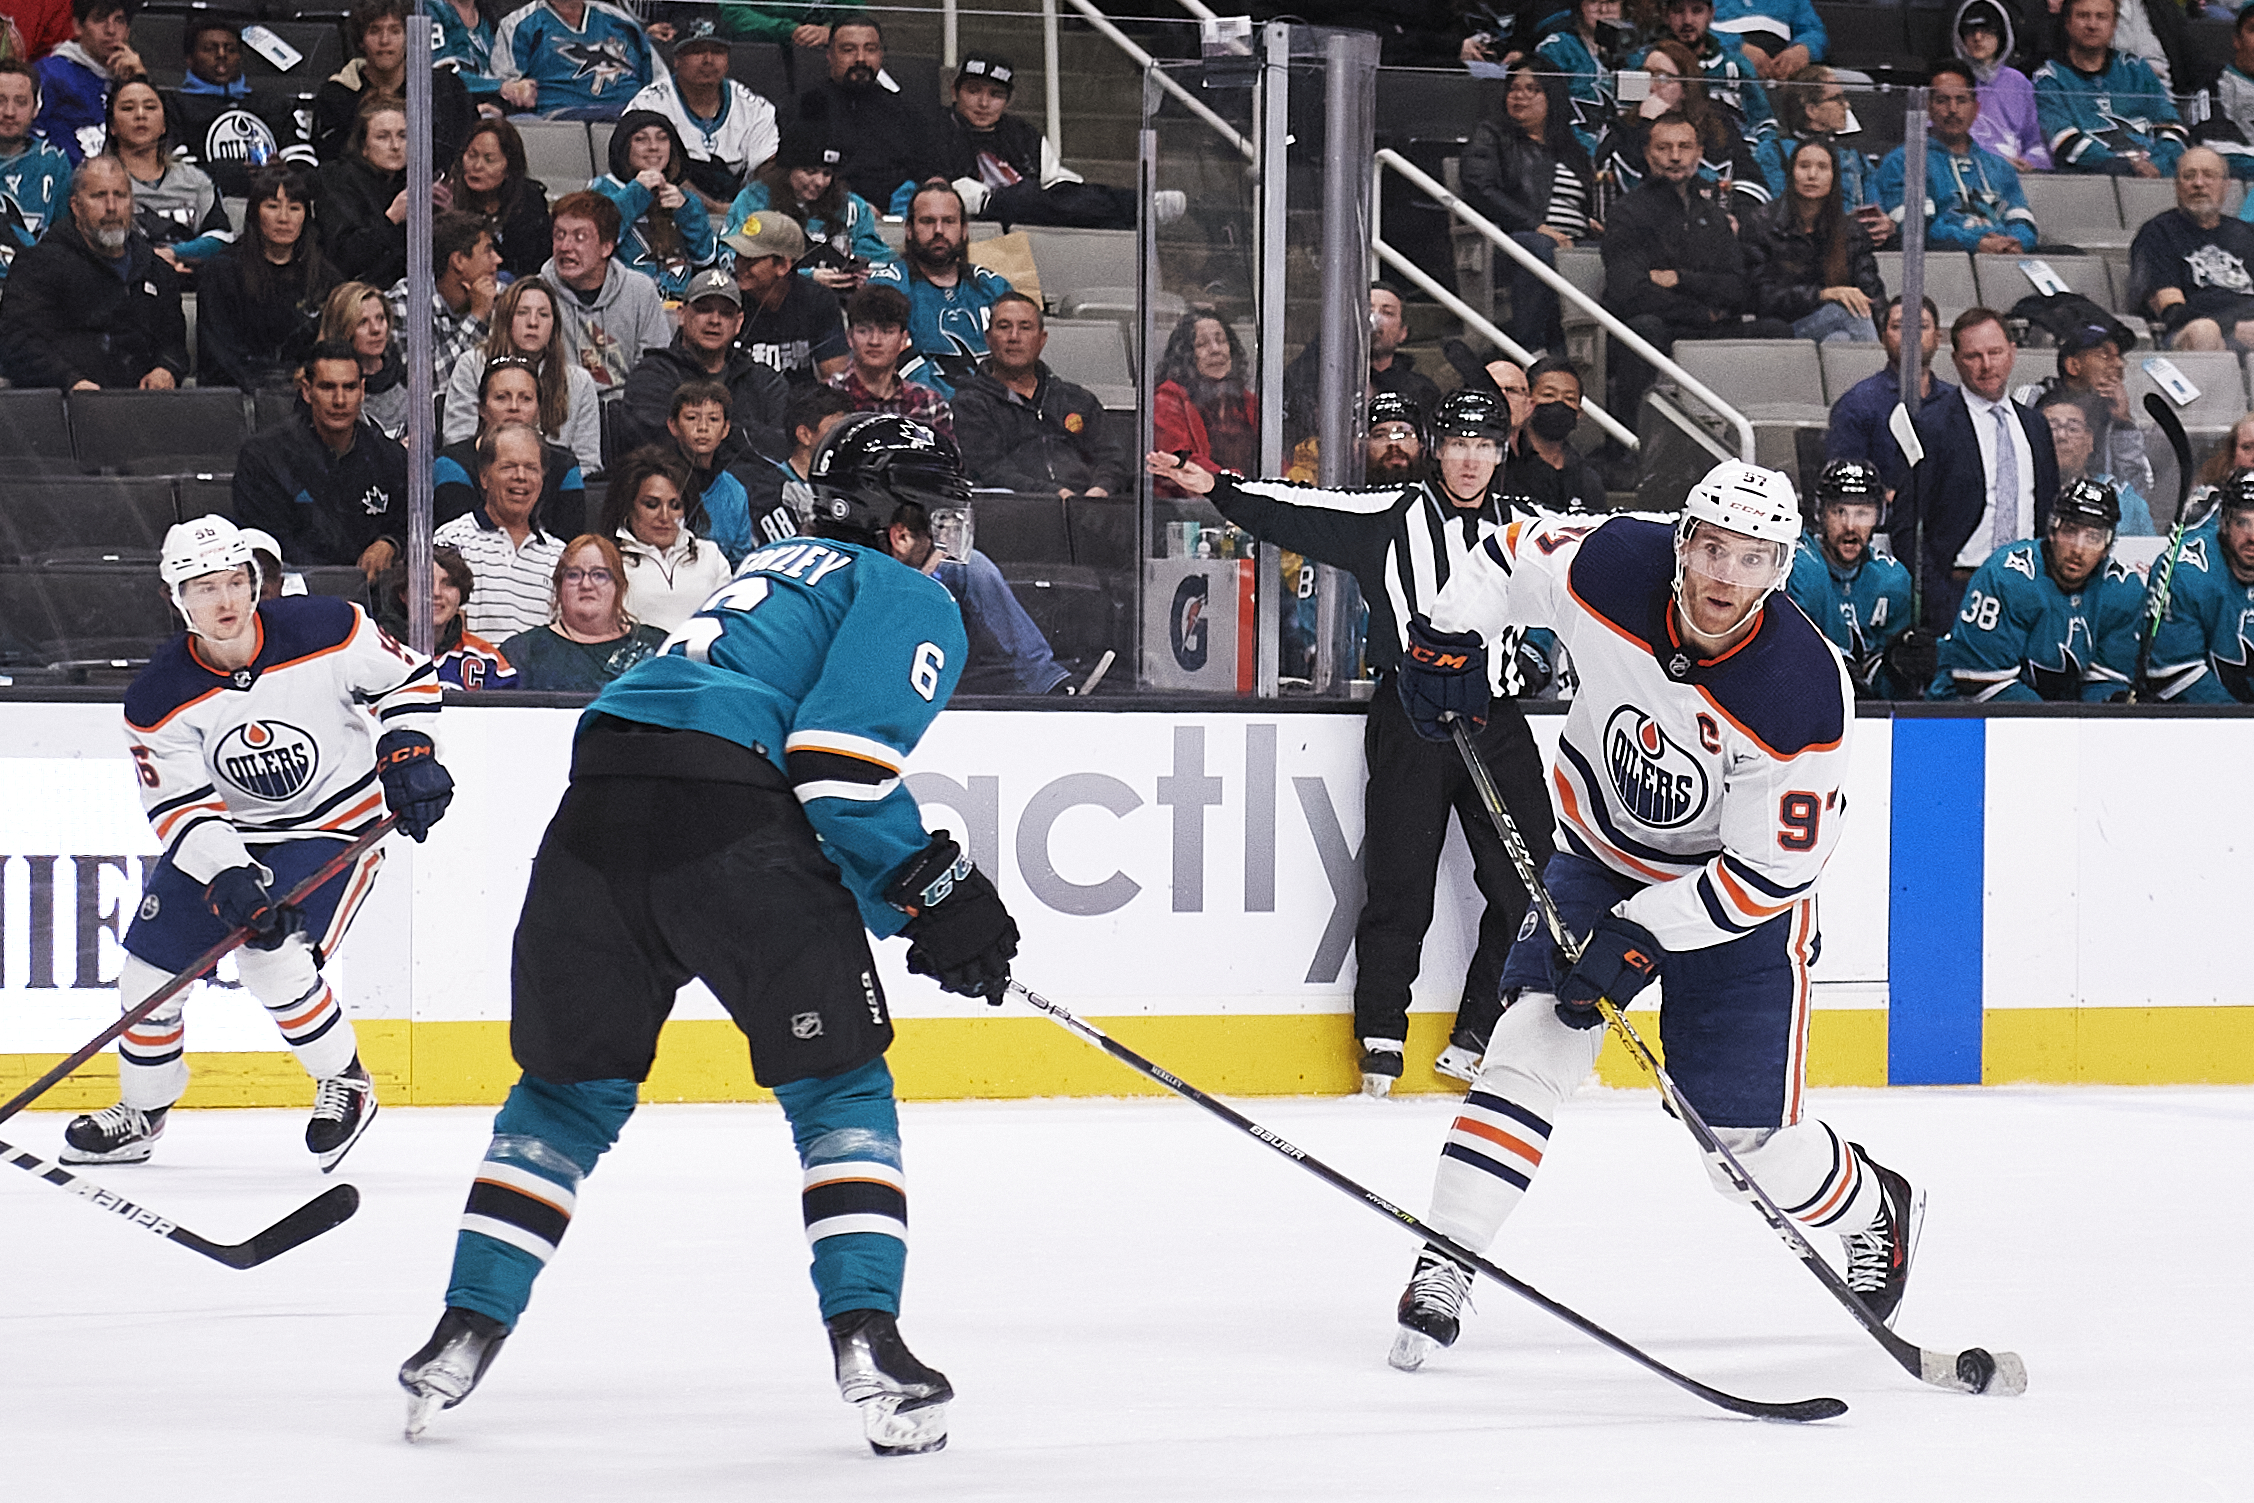 Edmonton Oilers center Connor McDavid (97) takes a shot during the NHL game between the San Jose Sharks and the Edmonton Oilers on April 5, 2022 at SAP Center in San Jose, CA.